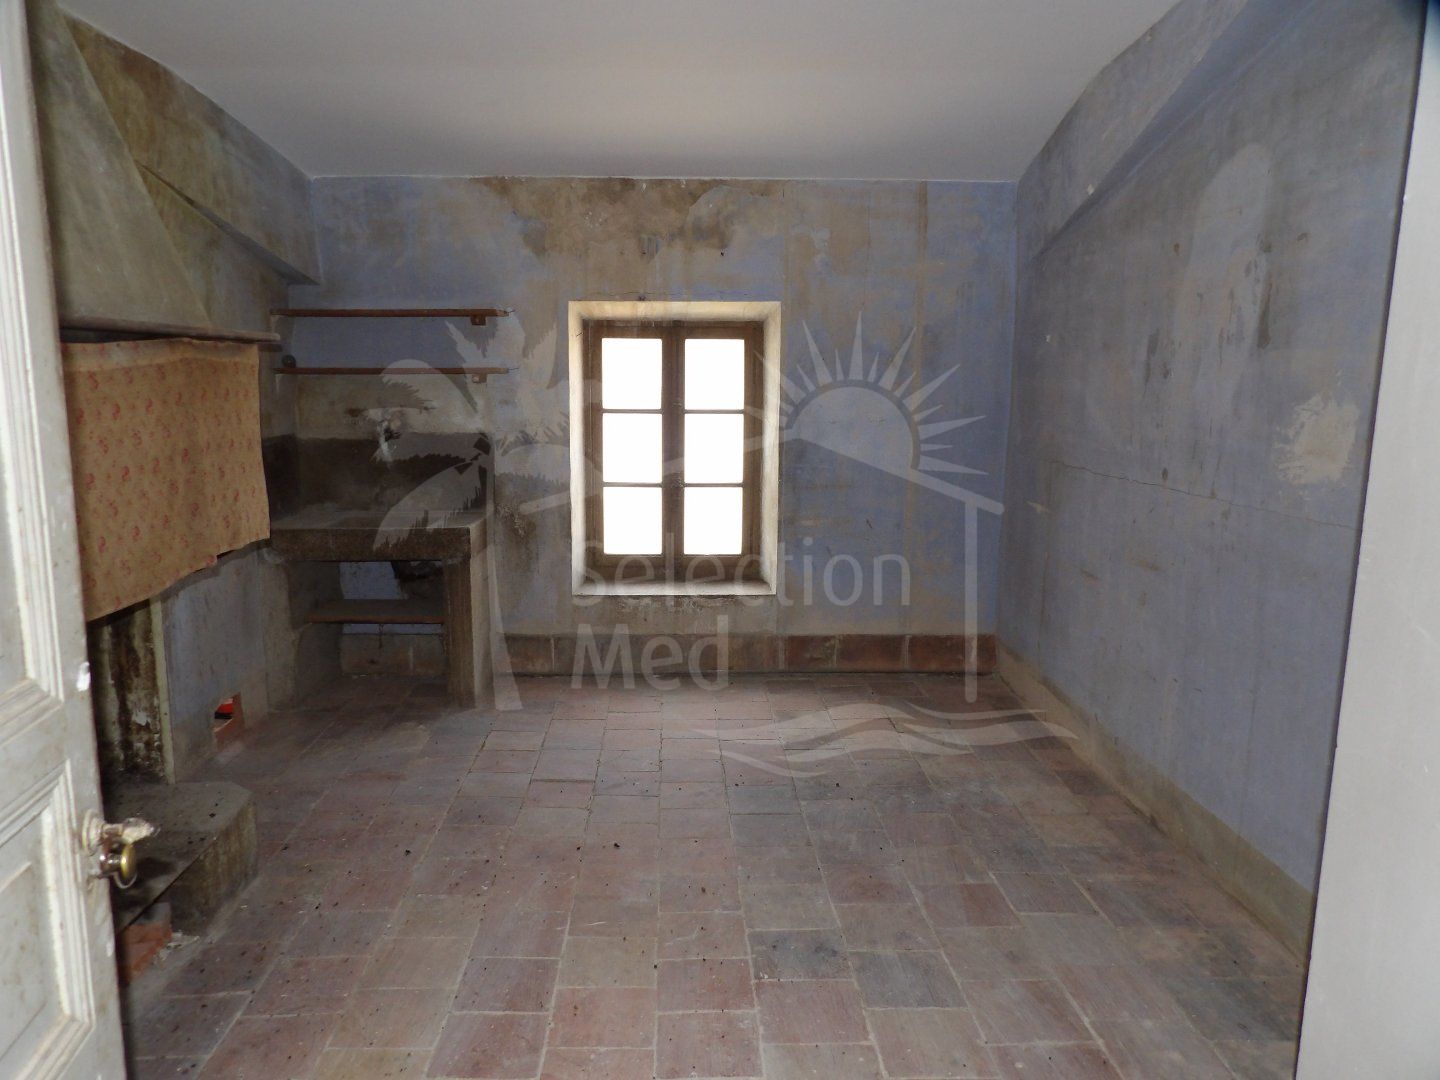 Charming character house in the Minervois